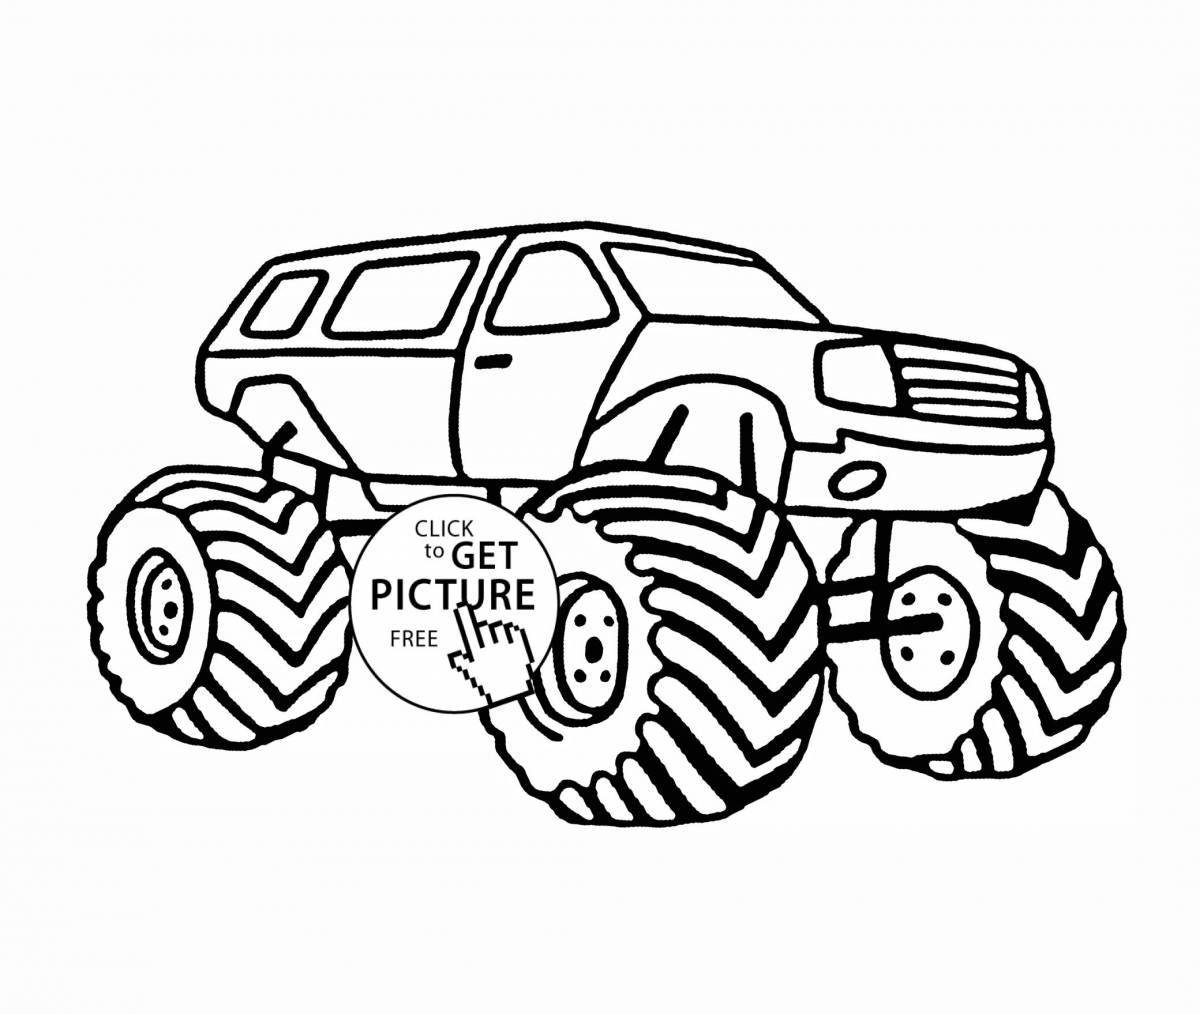 Fire monster truck grandiose coloring page